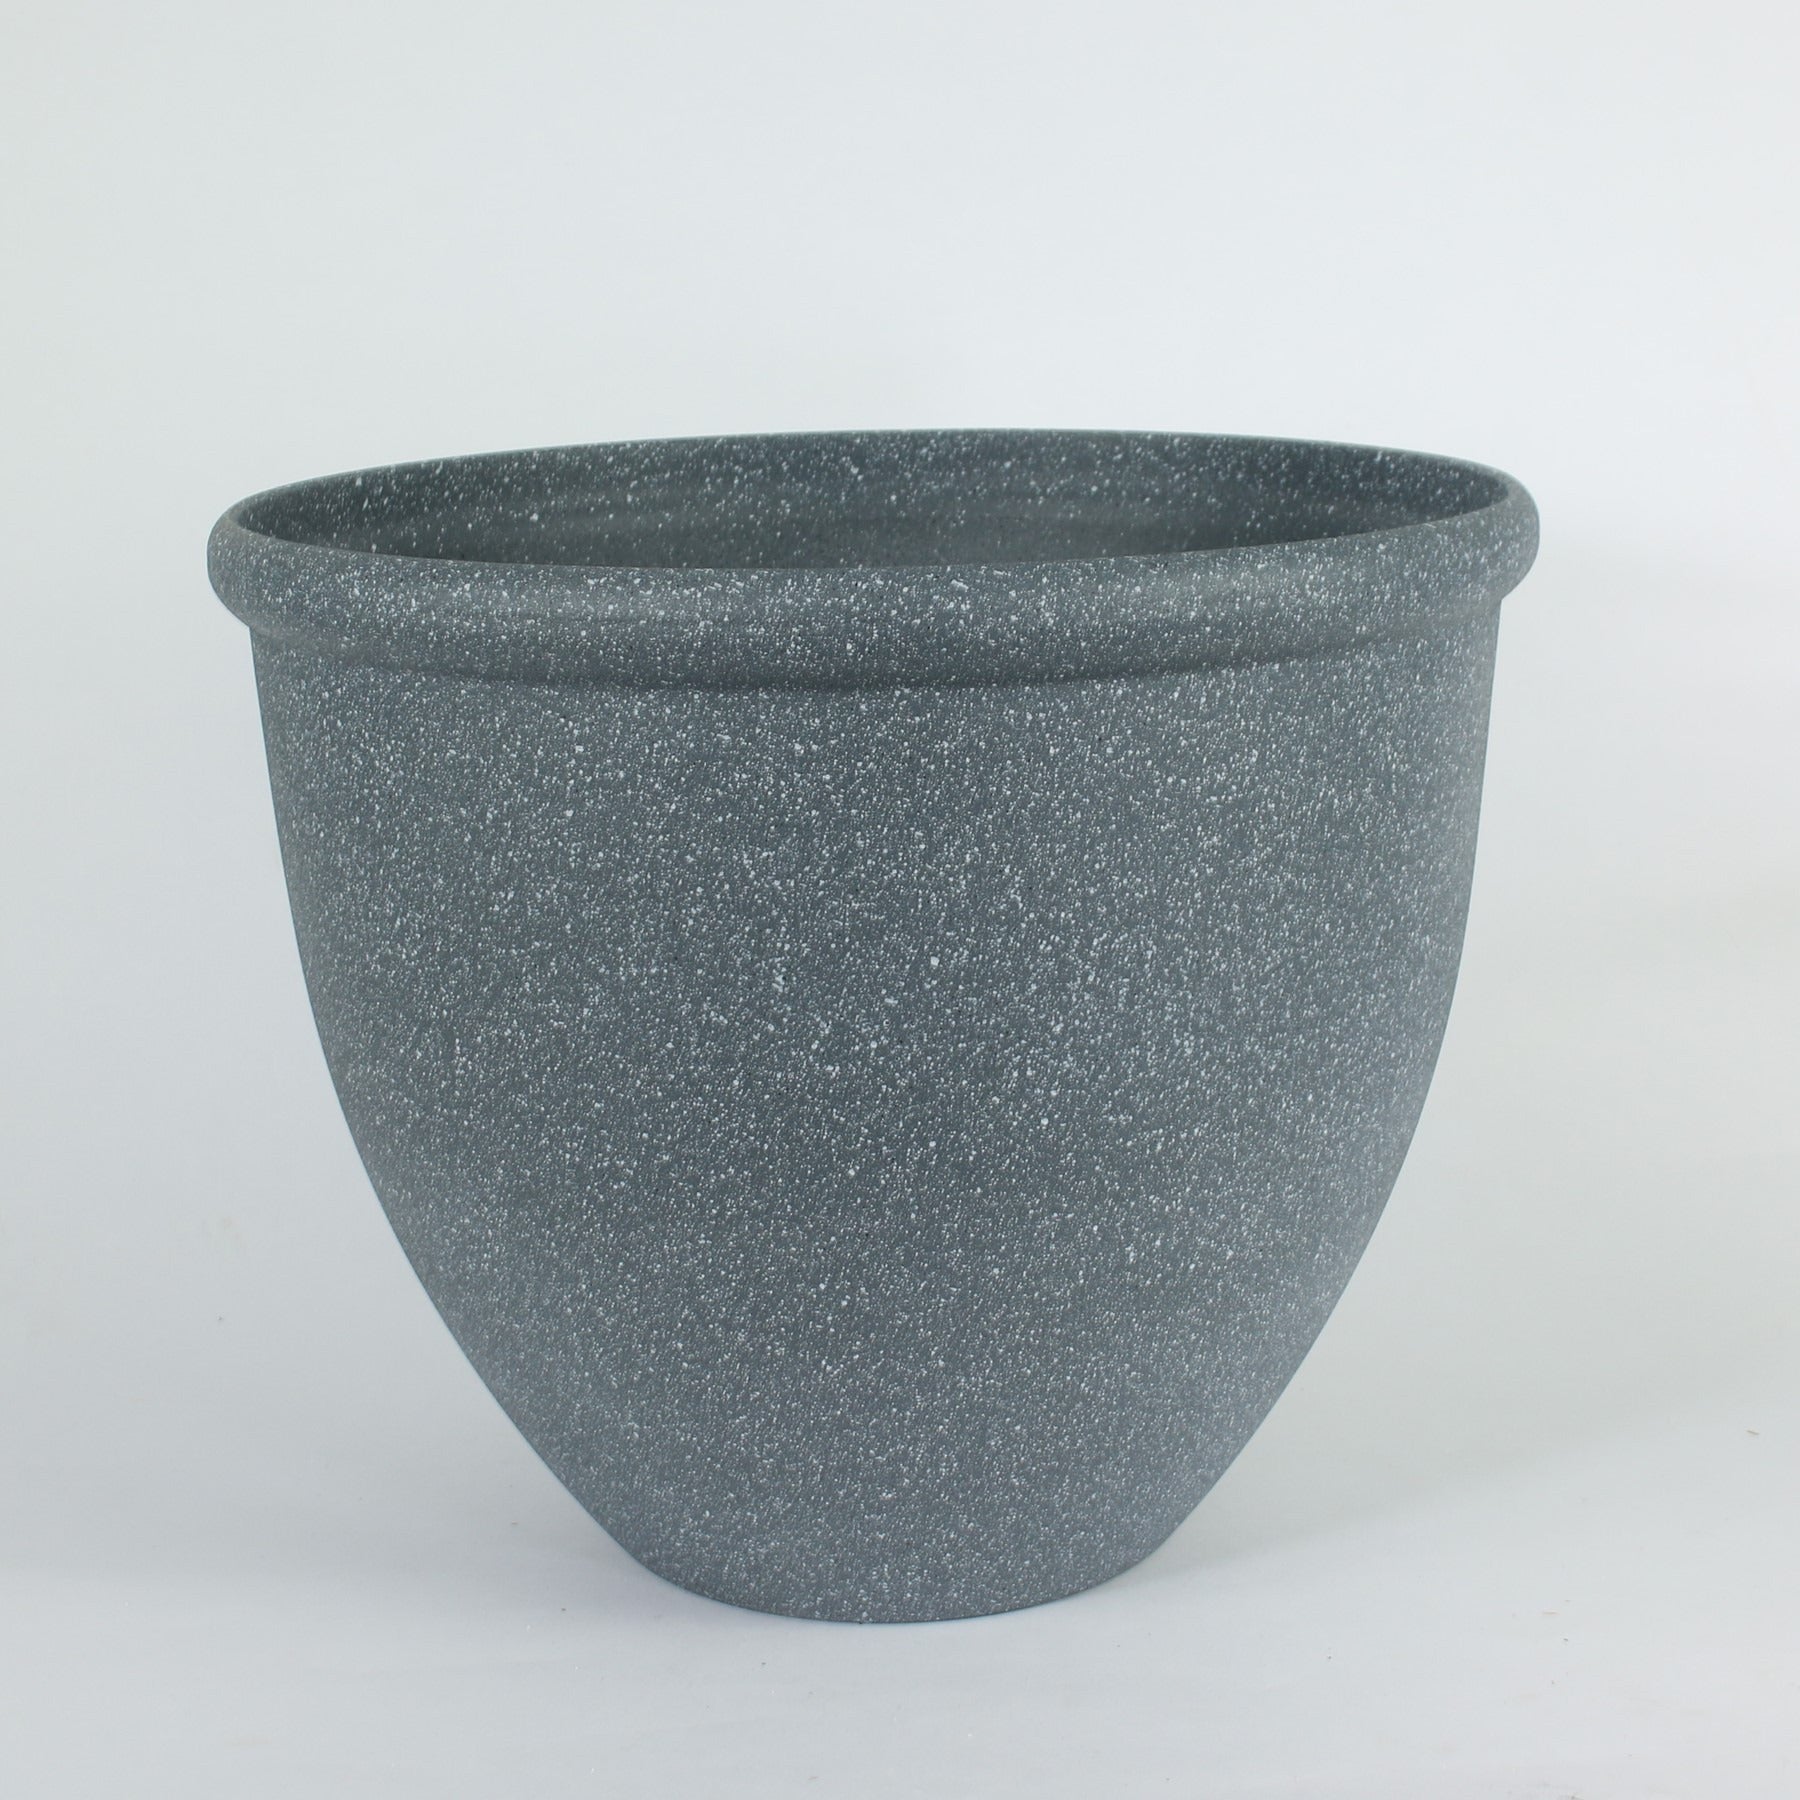 View 14 Inch Plastic Stone Effect Planter information